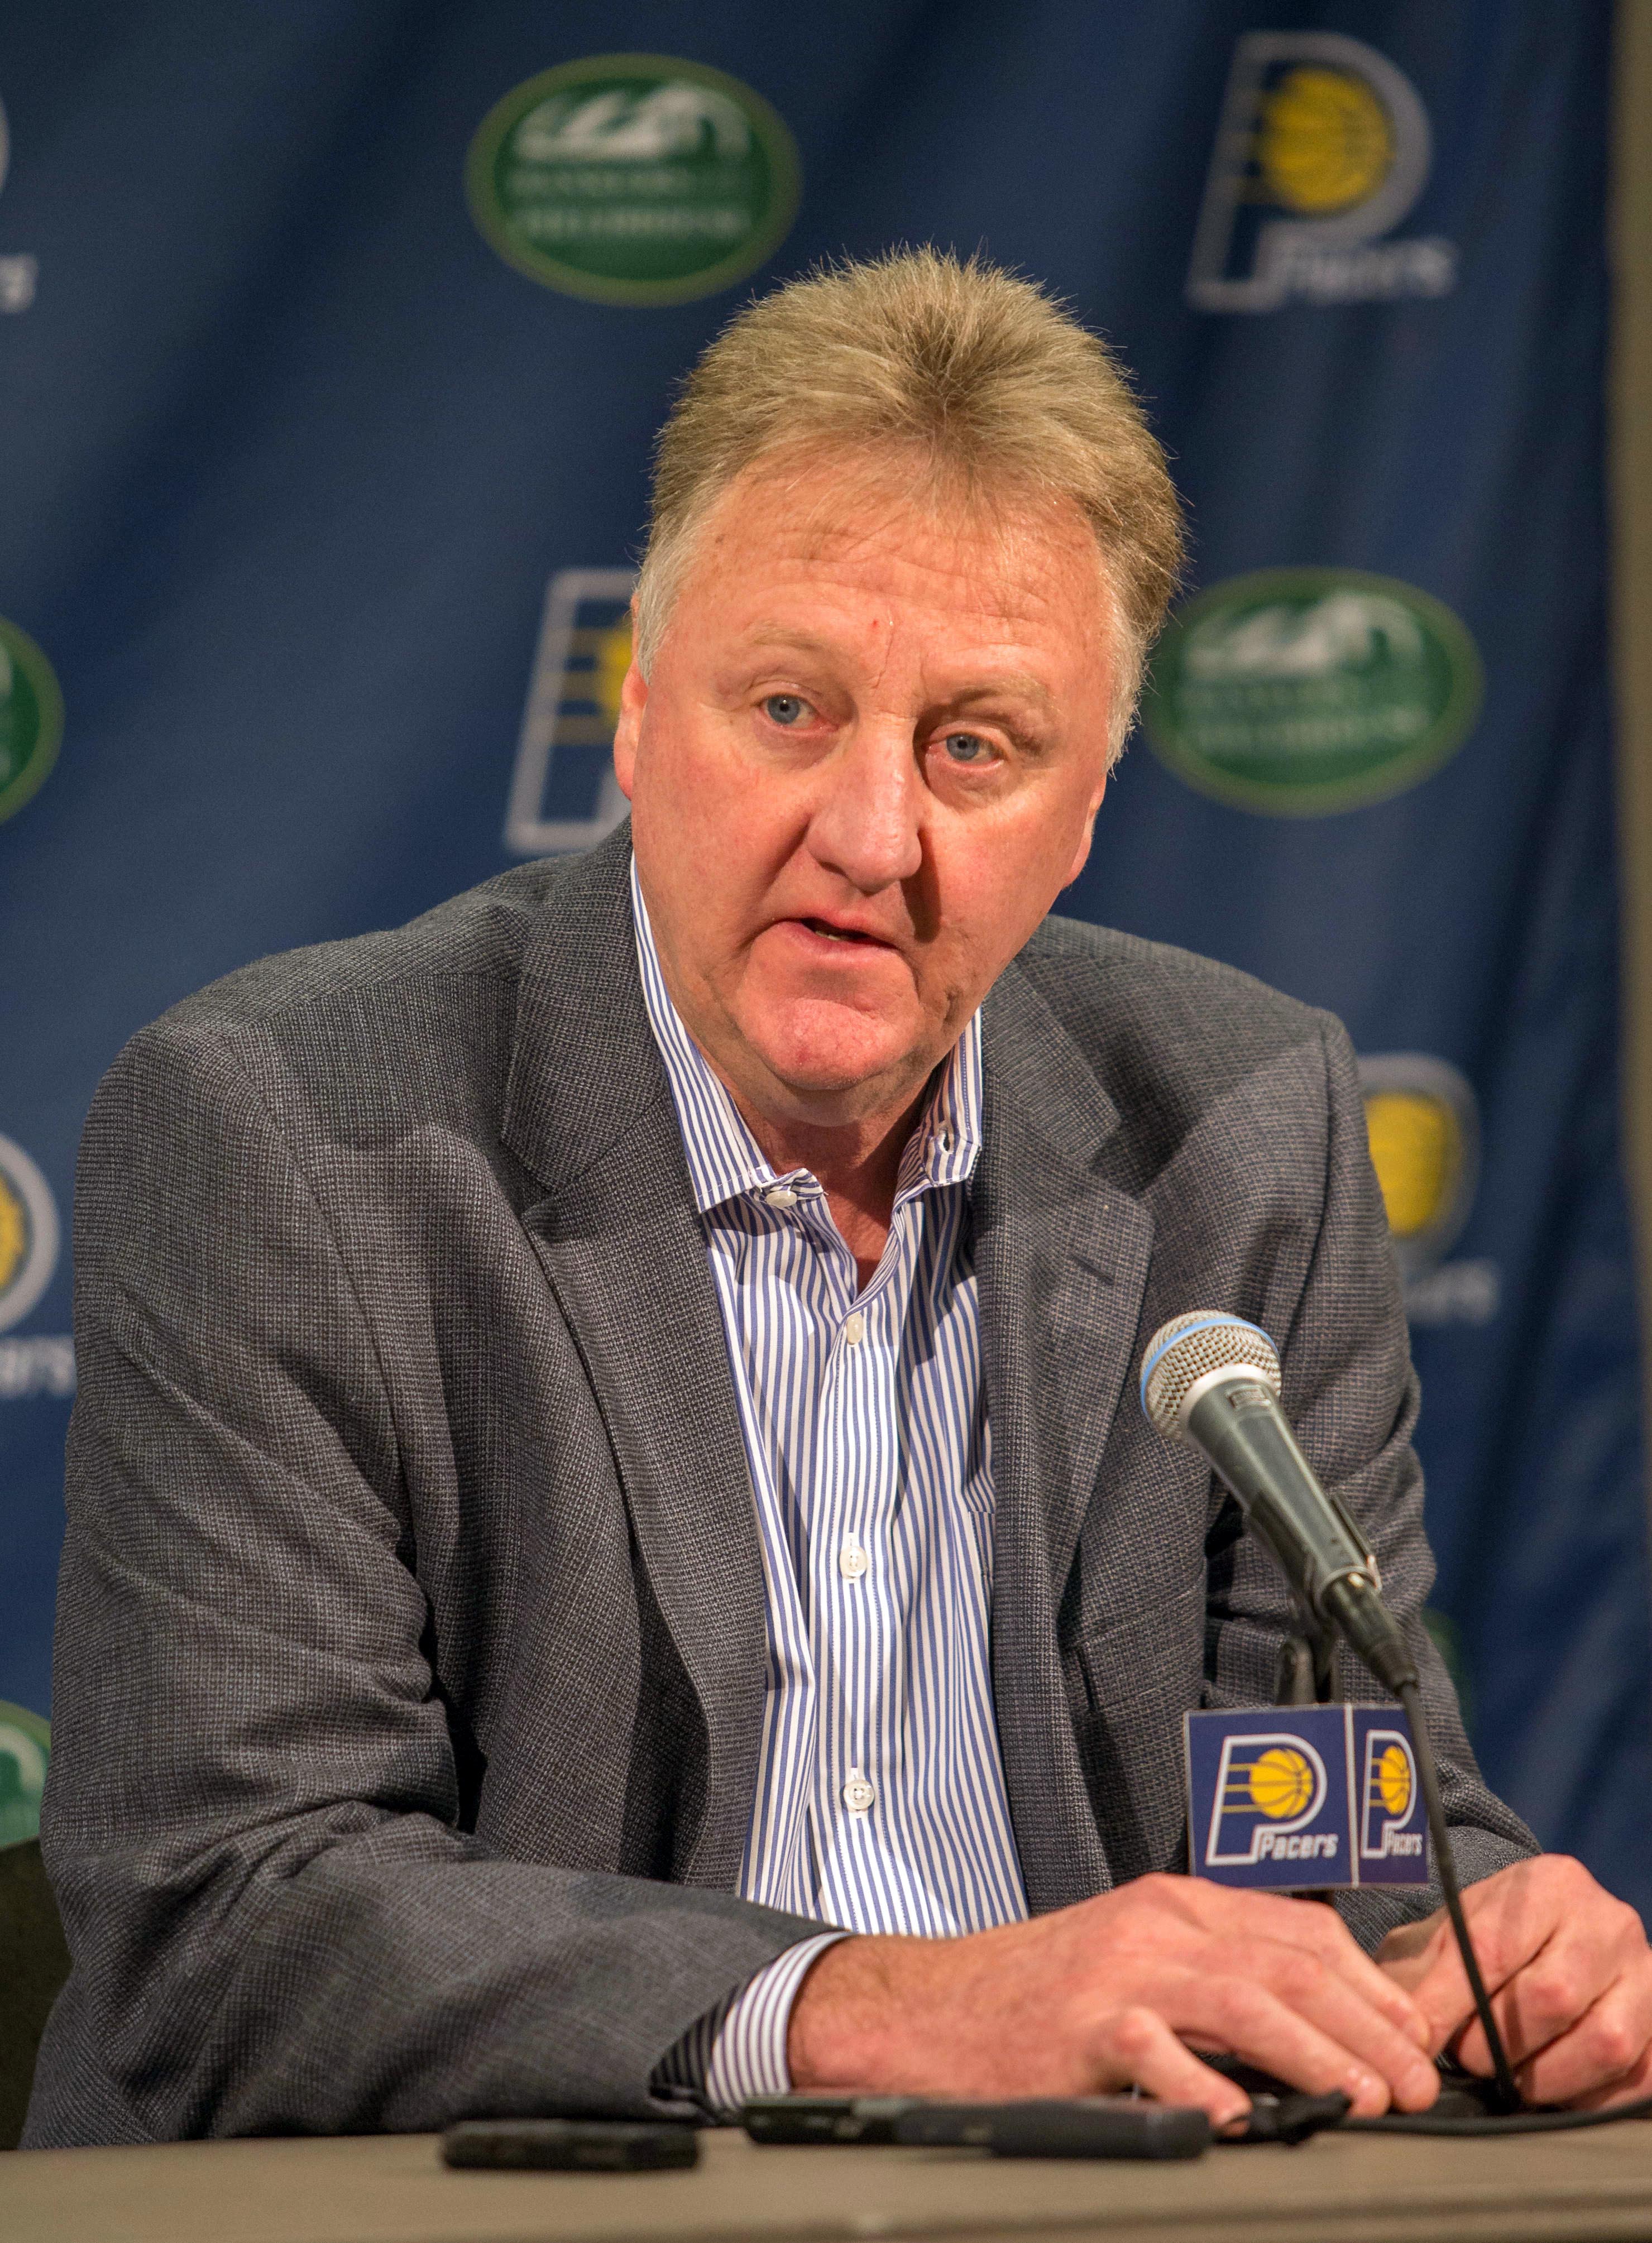 Larry Bird resigns as Pacers president, Kevin Pritchard to take over